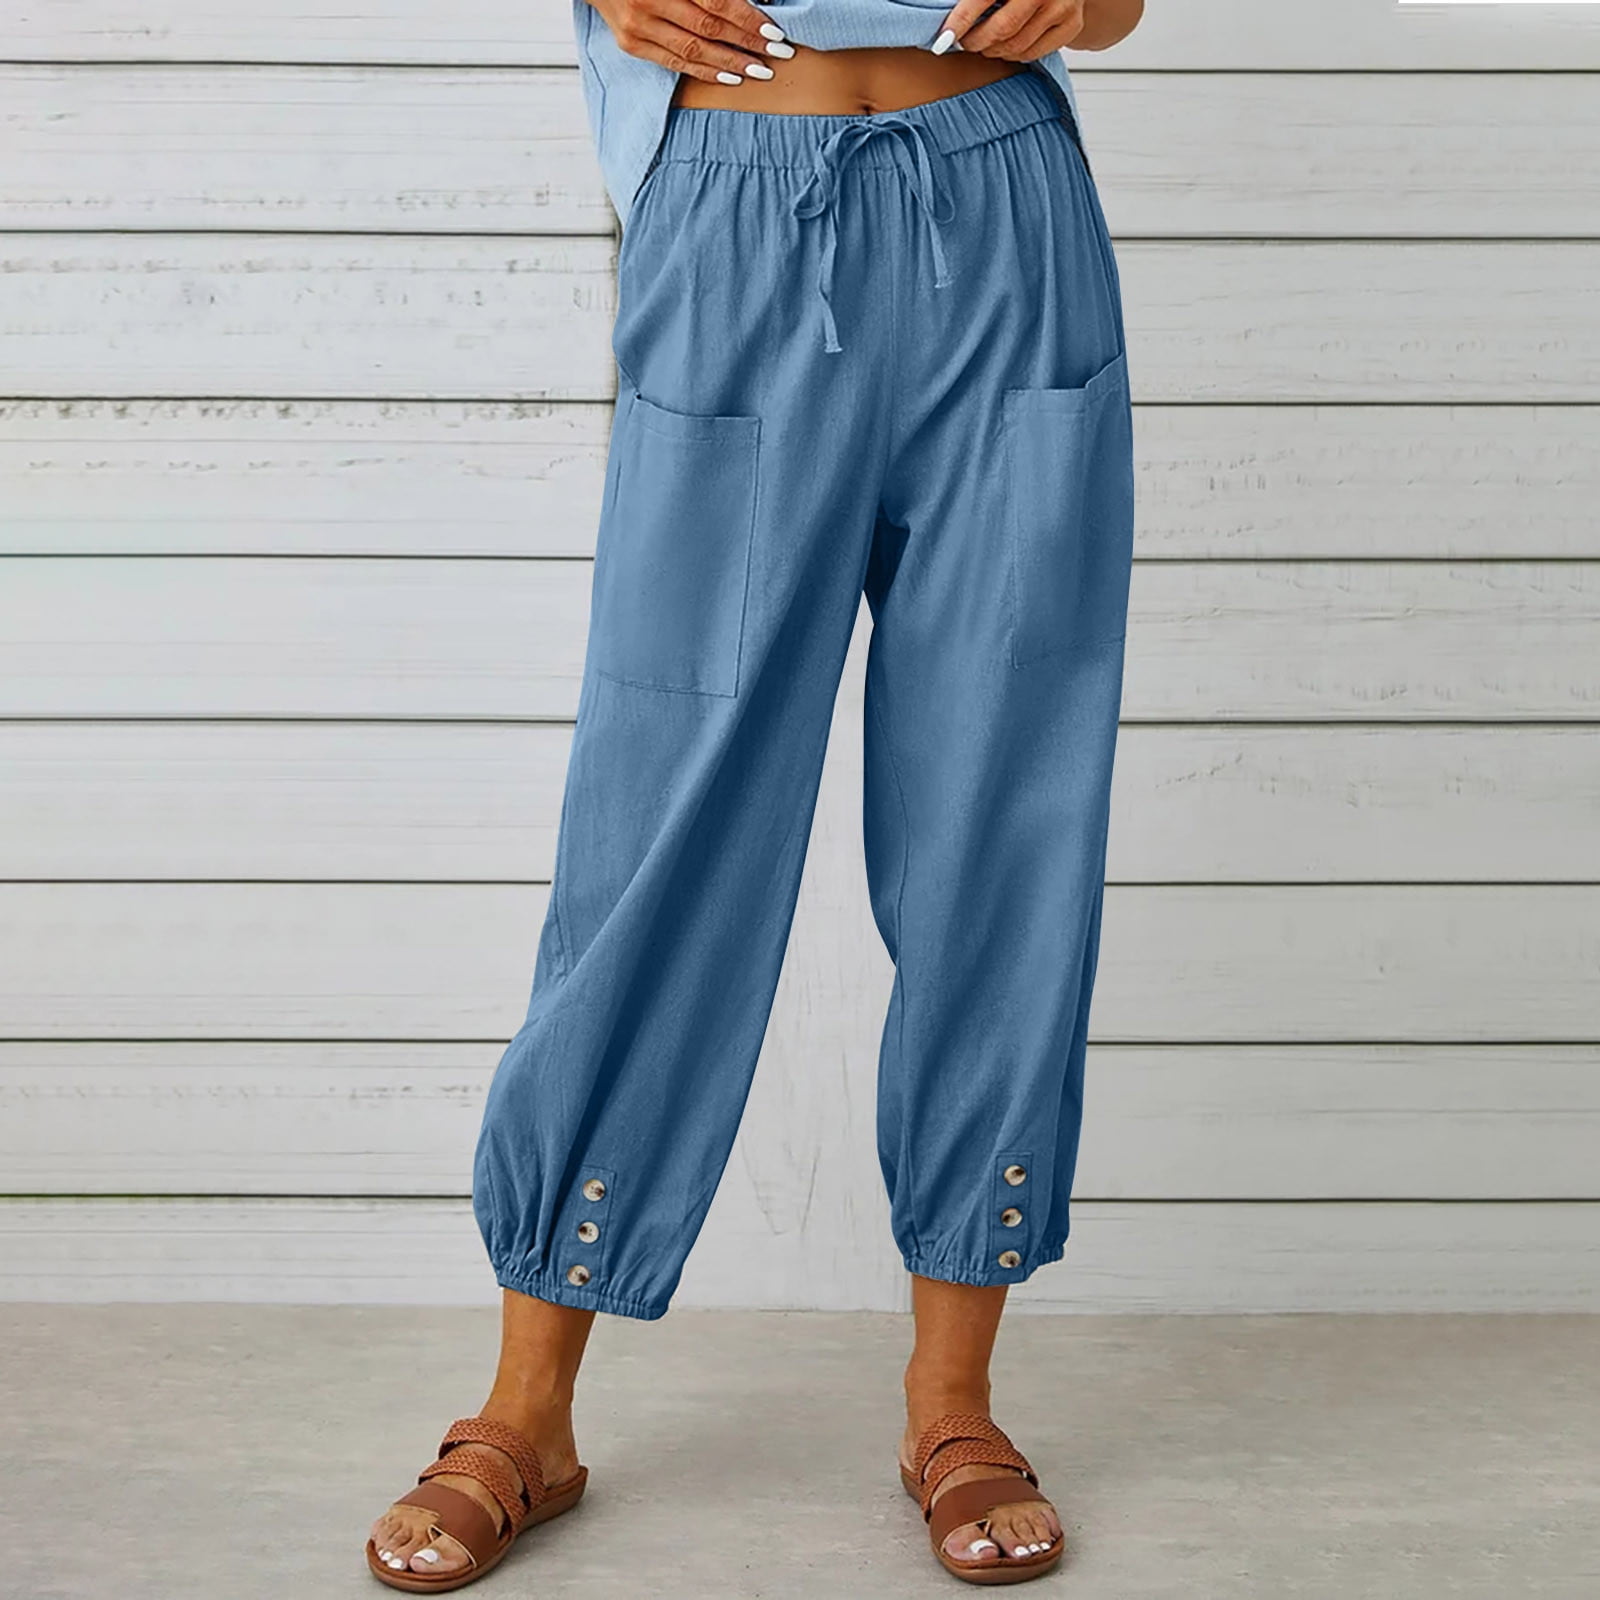 Women's Casual Capris Cotton and Linen Drawstring Solid Summer Comfy  Trousers Pockets Stretchy Plus Size Loungewear Button Ankle Pants(M,Dark  Gray) 